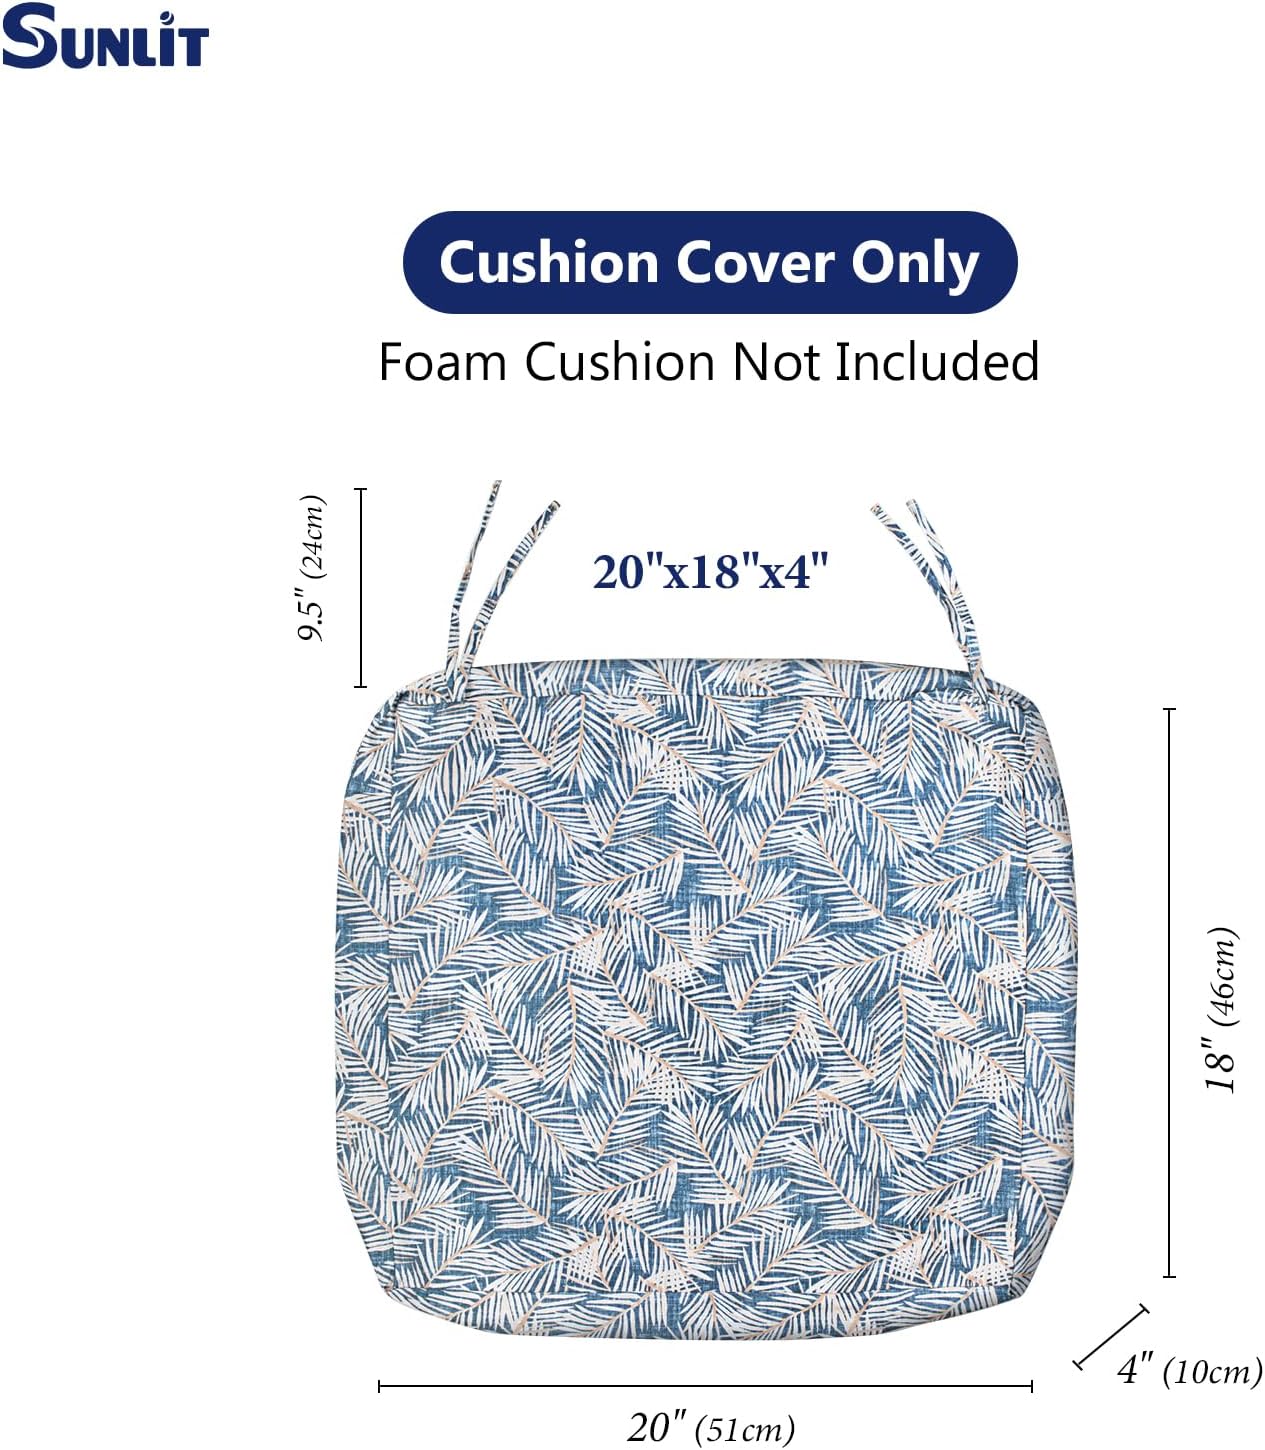 Sunlit Outdoor Cushion Covers, Replacement Cover Only, 4 Pack Water-Repellent Patio Chair Seat Slipcovers with Zipper and Tie, 20" x 18" x 4", Leaf, Blue Yellow